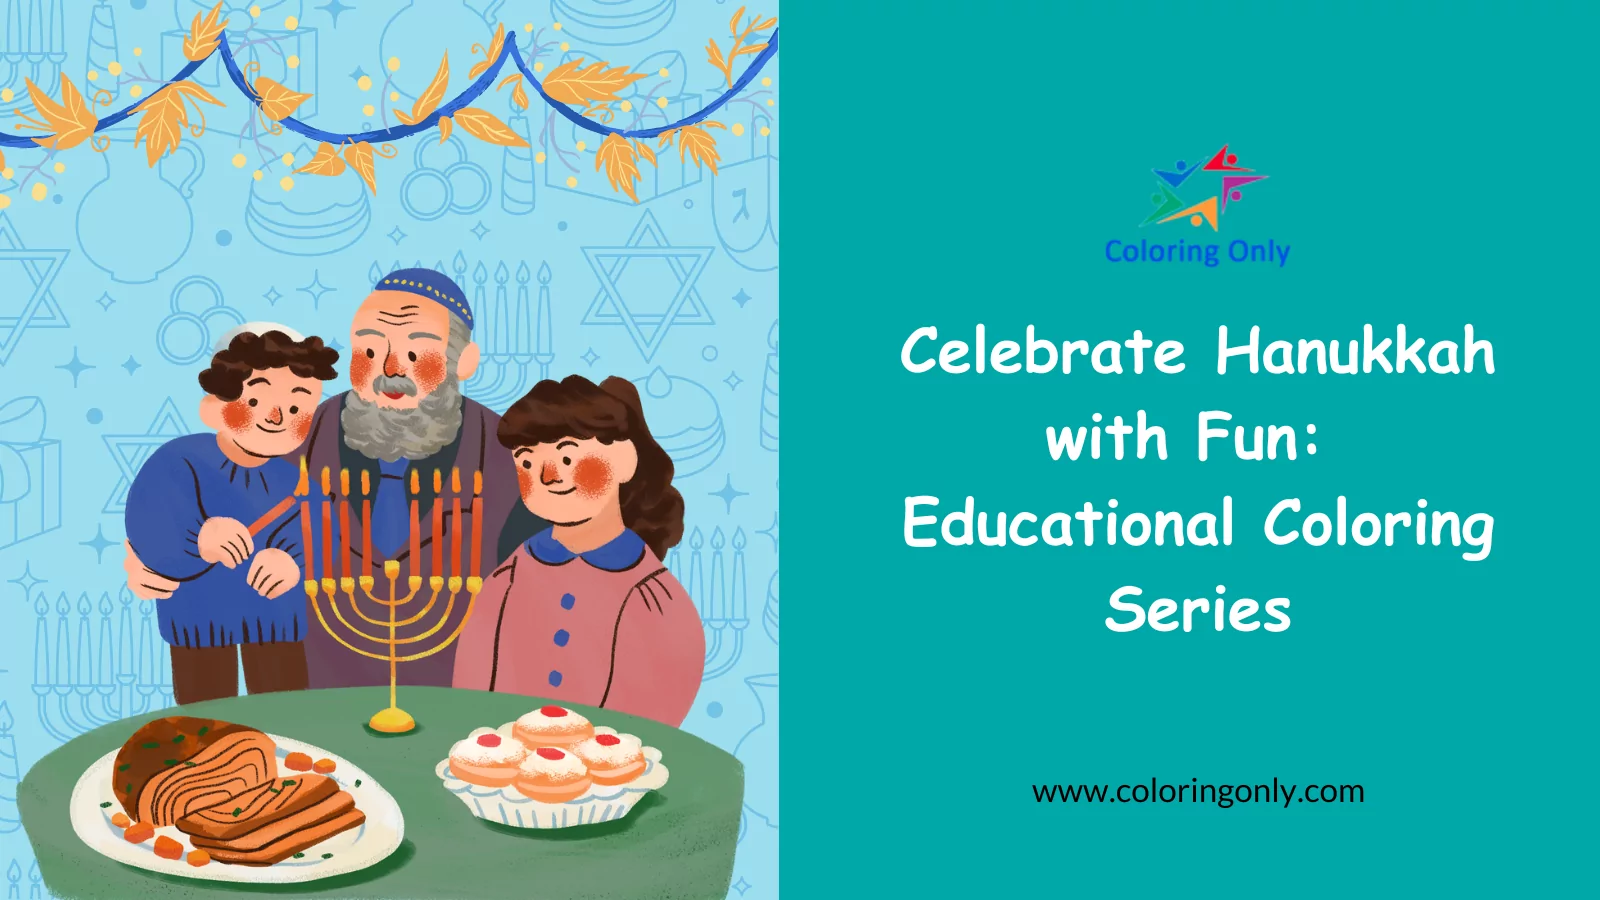 How to Celebrate Hanukkah with Fun and Educational Coloring Pages